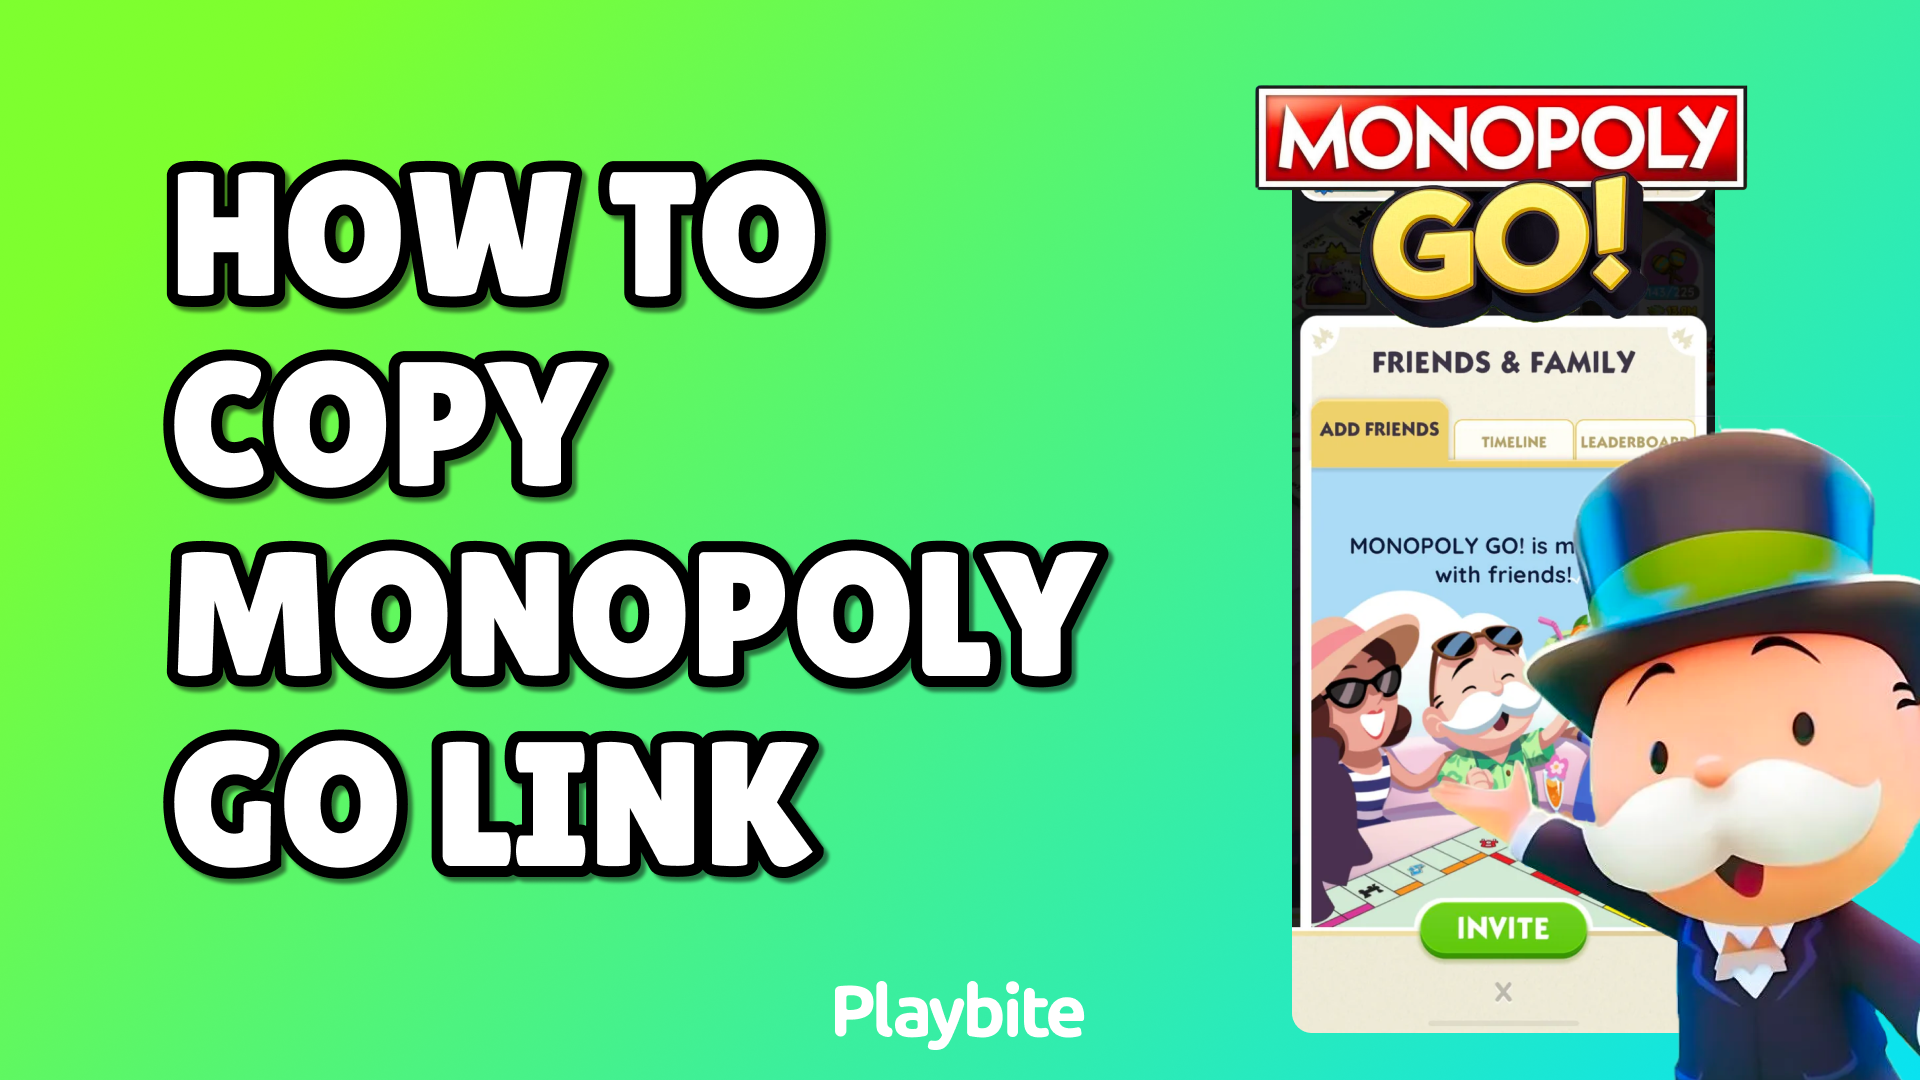 How to Copy Monopoly Go Link